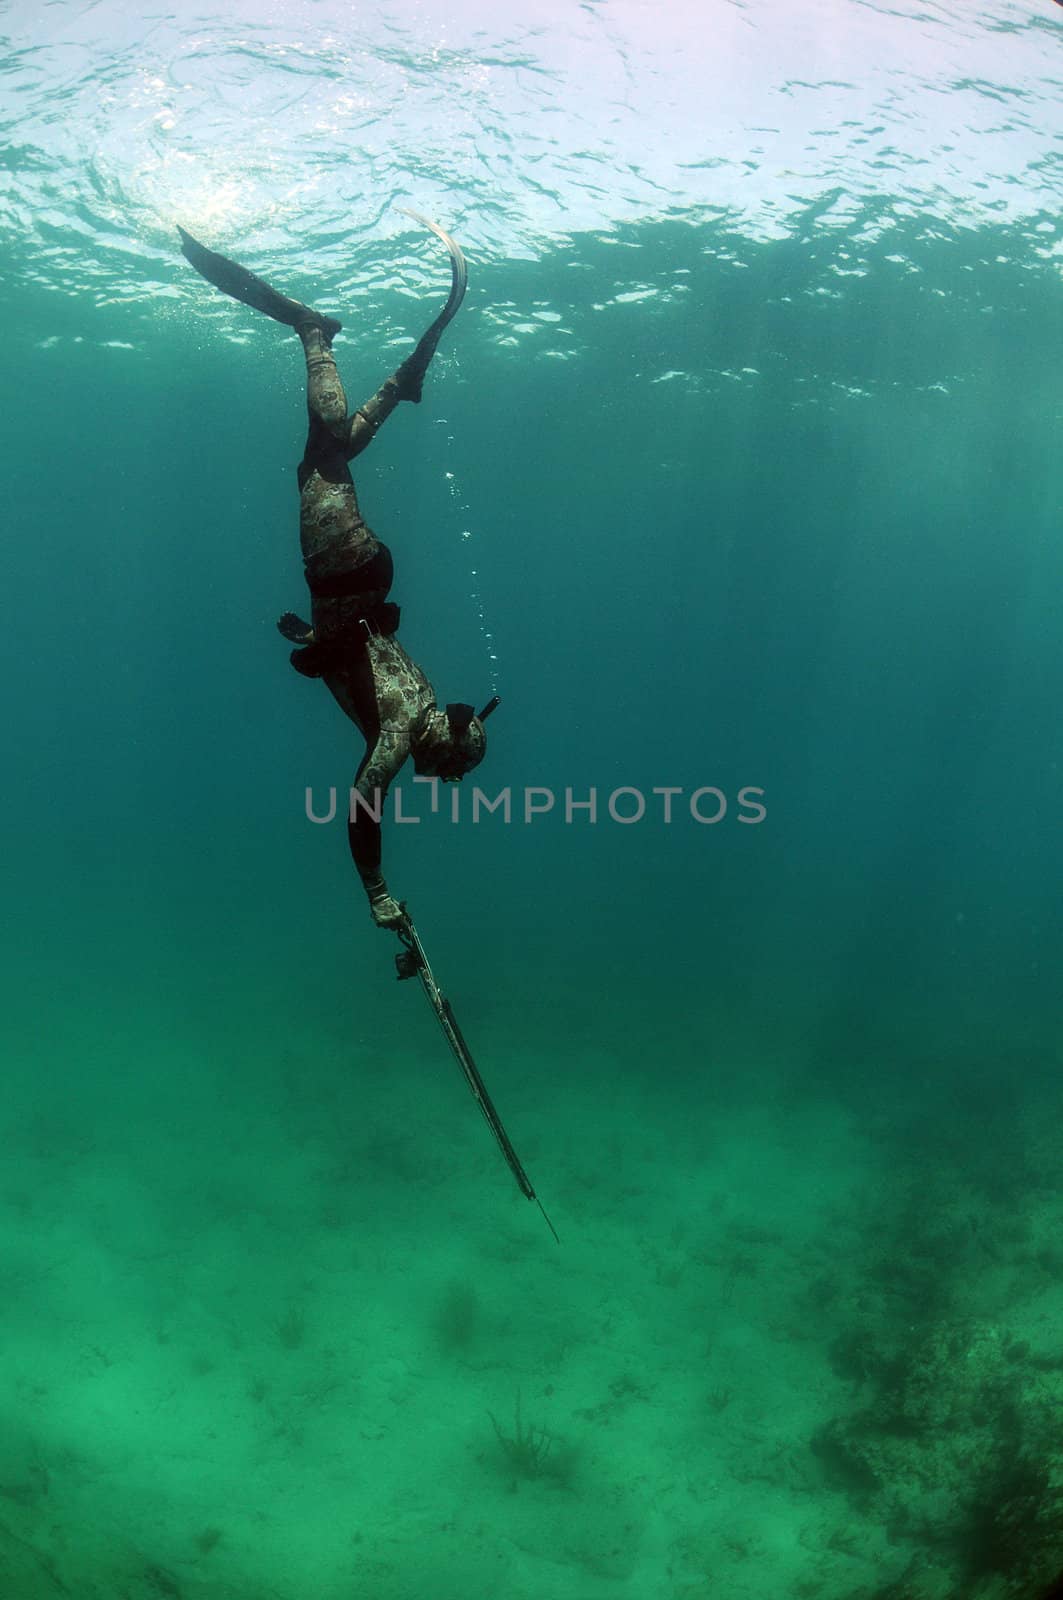 Man underwater spearfishing and free diving in camouflage wetsuit in Atlantic Ocean